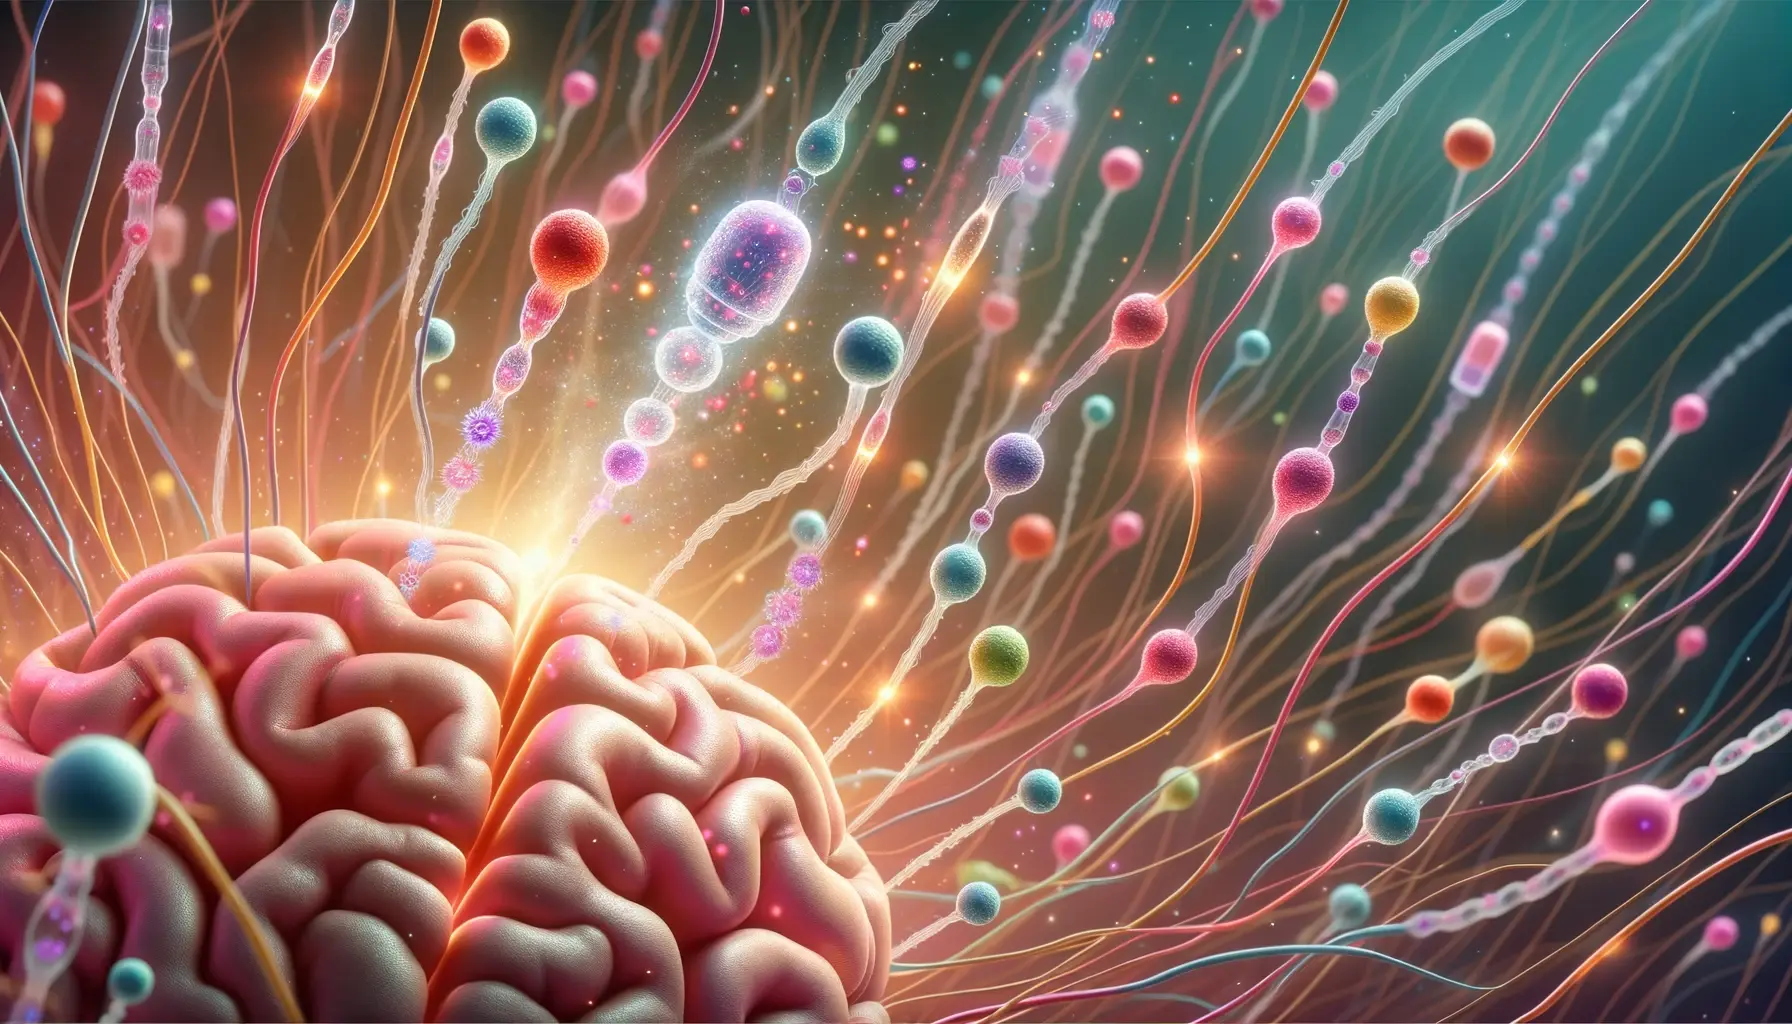 Illustration of a dynamic scene inside the brain, where neurotransmitters are shown as colorful particles flowing between neurons. Some neurotransmitters are seen binding to receptors, sparking electrical impulses, while others are drifting away. The background has a soft glow, emphasizing the importance of these chemical messengers.